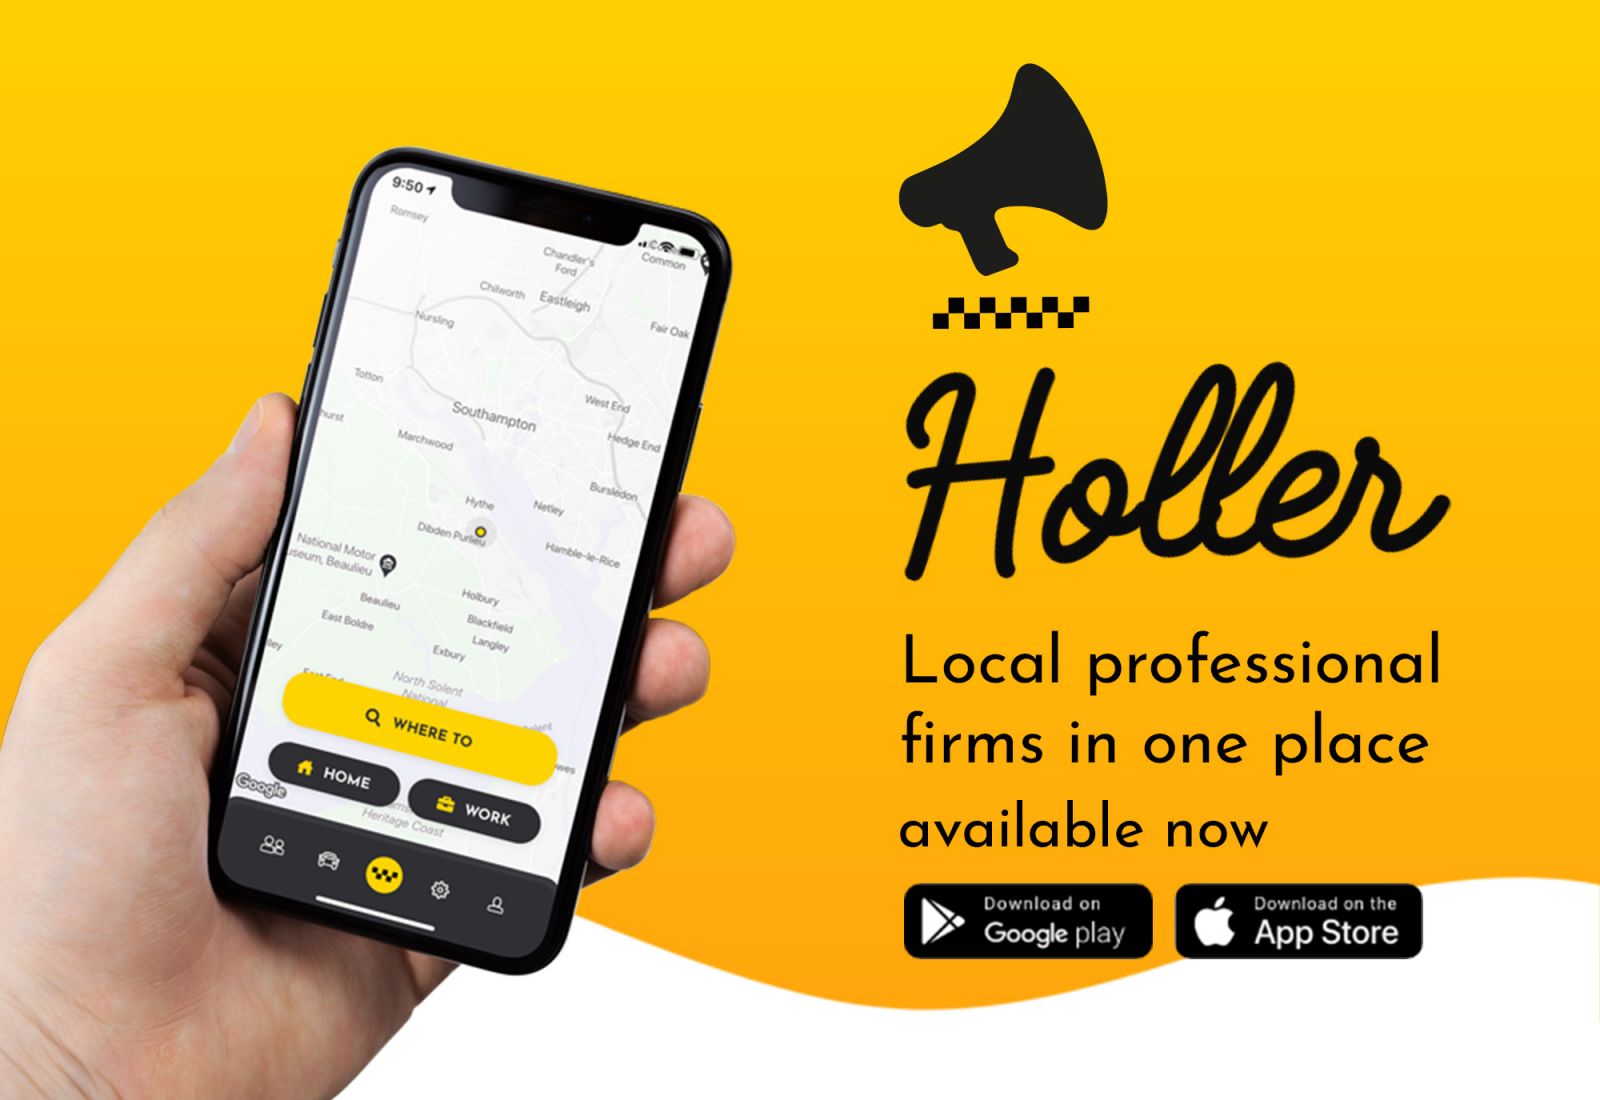 Go to the Holler Taxi app page